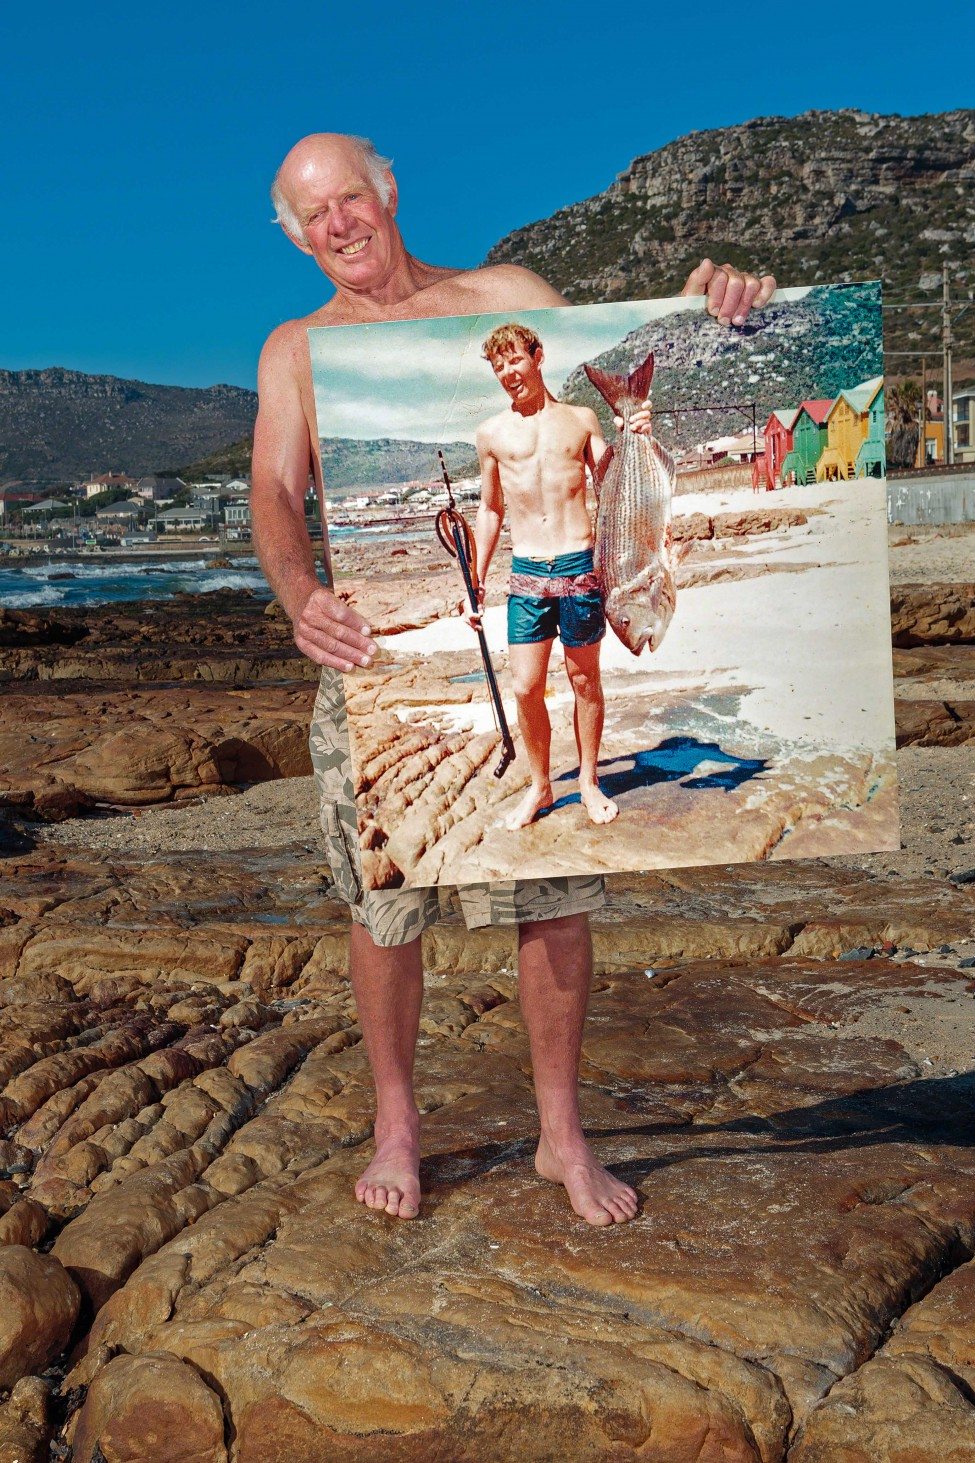 In December 1968, Geoff Fridjhon posed for a photo holding a large white musselcracker Sparodon durbanensis he had caught while spearfishing off Dalebrook beach. A fish of this size would have been close to 30 years old. Forty-six years later Fridgeon stands in the exact same spot holding an enlargement of the photo. Today the species has all but disappeared from False Bay. A white musselcracker can take more than five years to reach sexual maturity, which makes the species highly susceptible to overfishing.